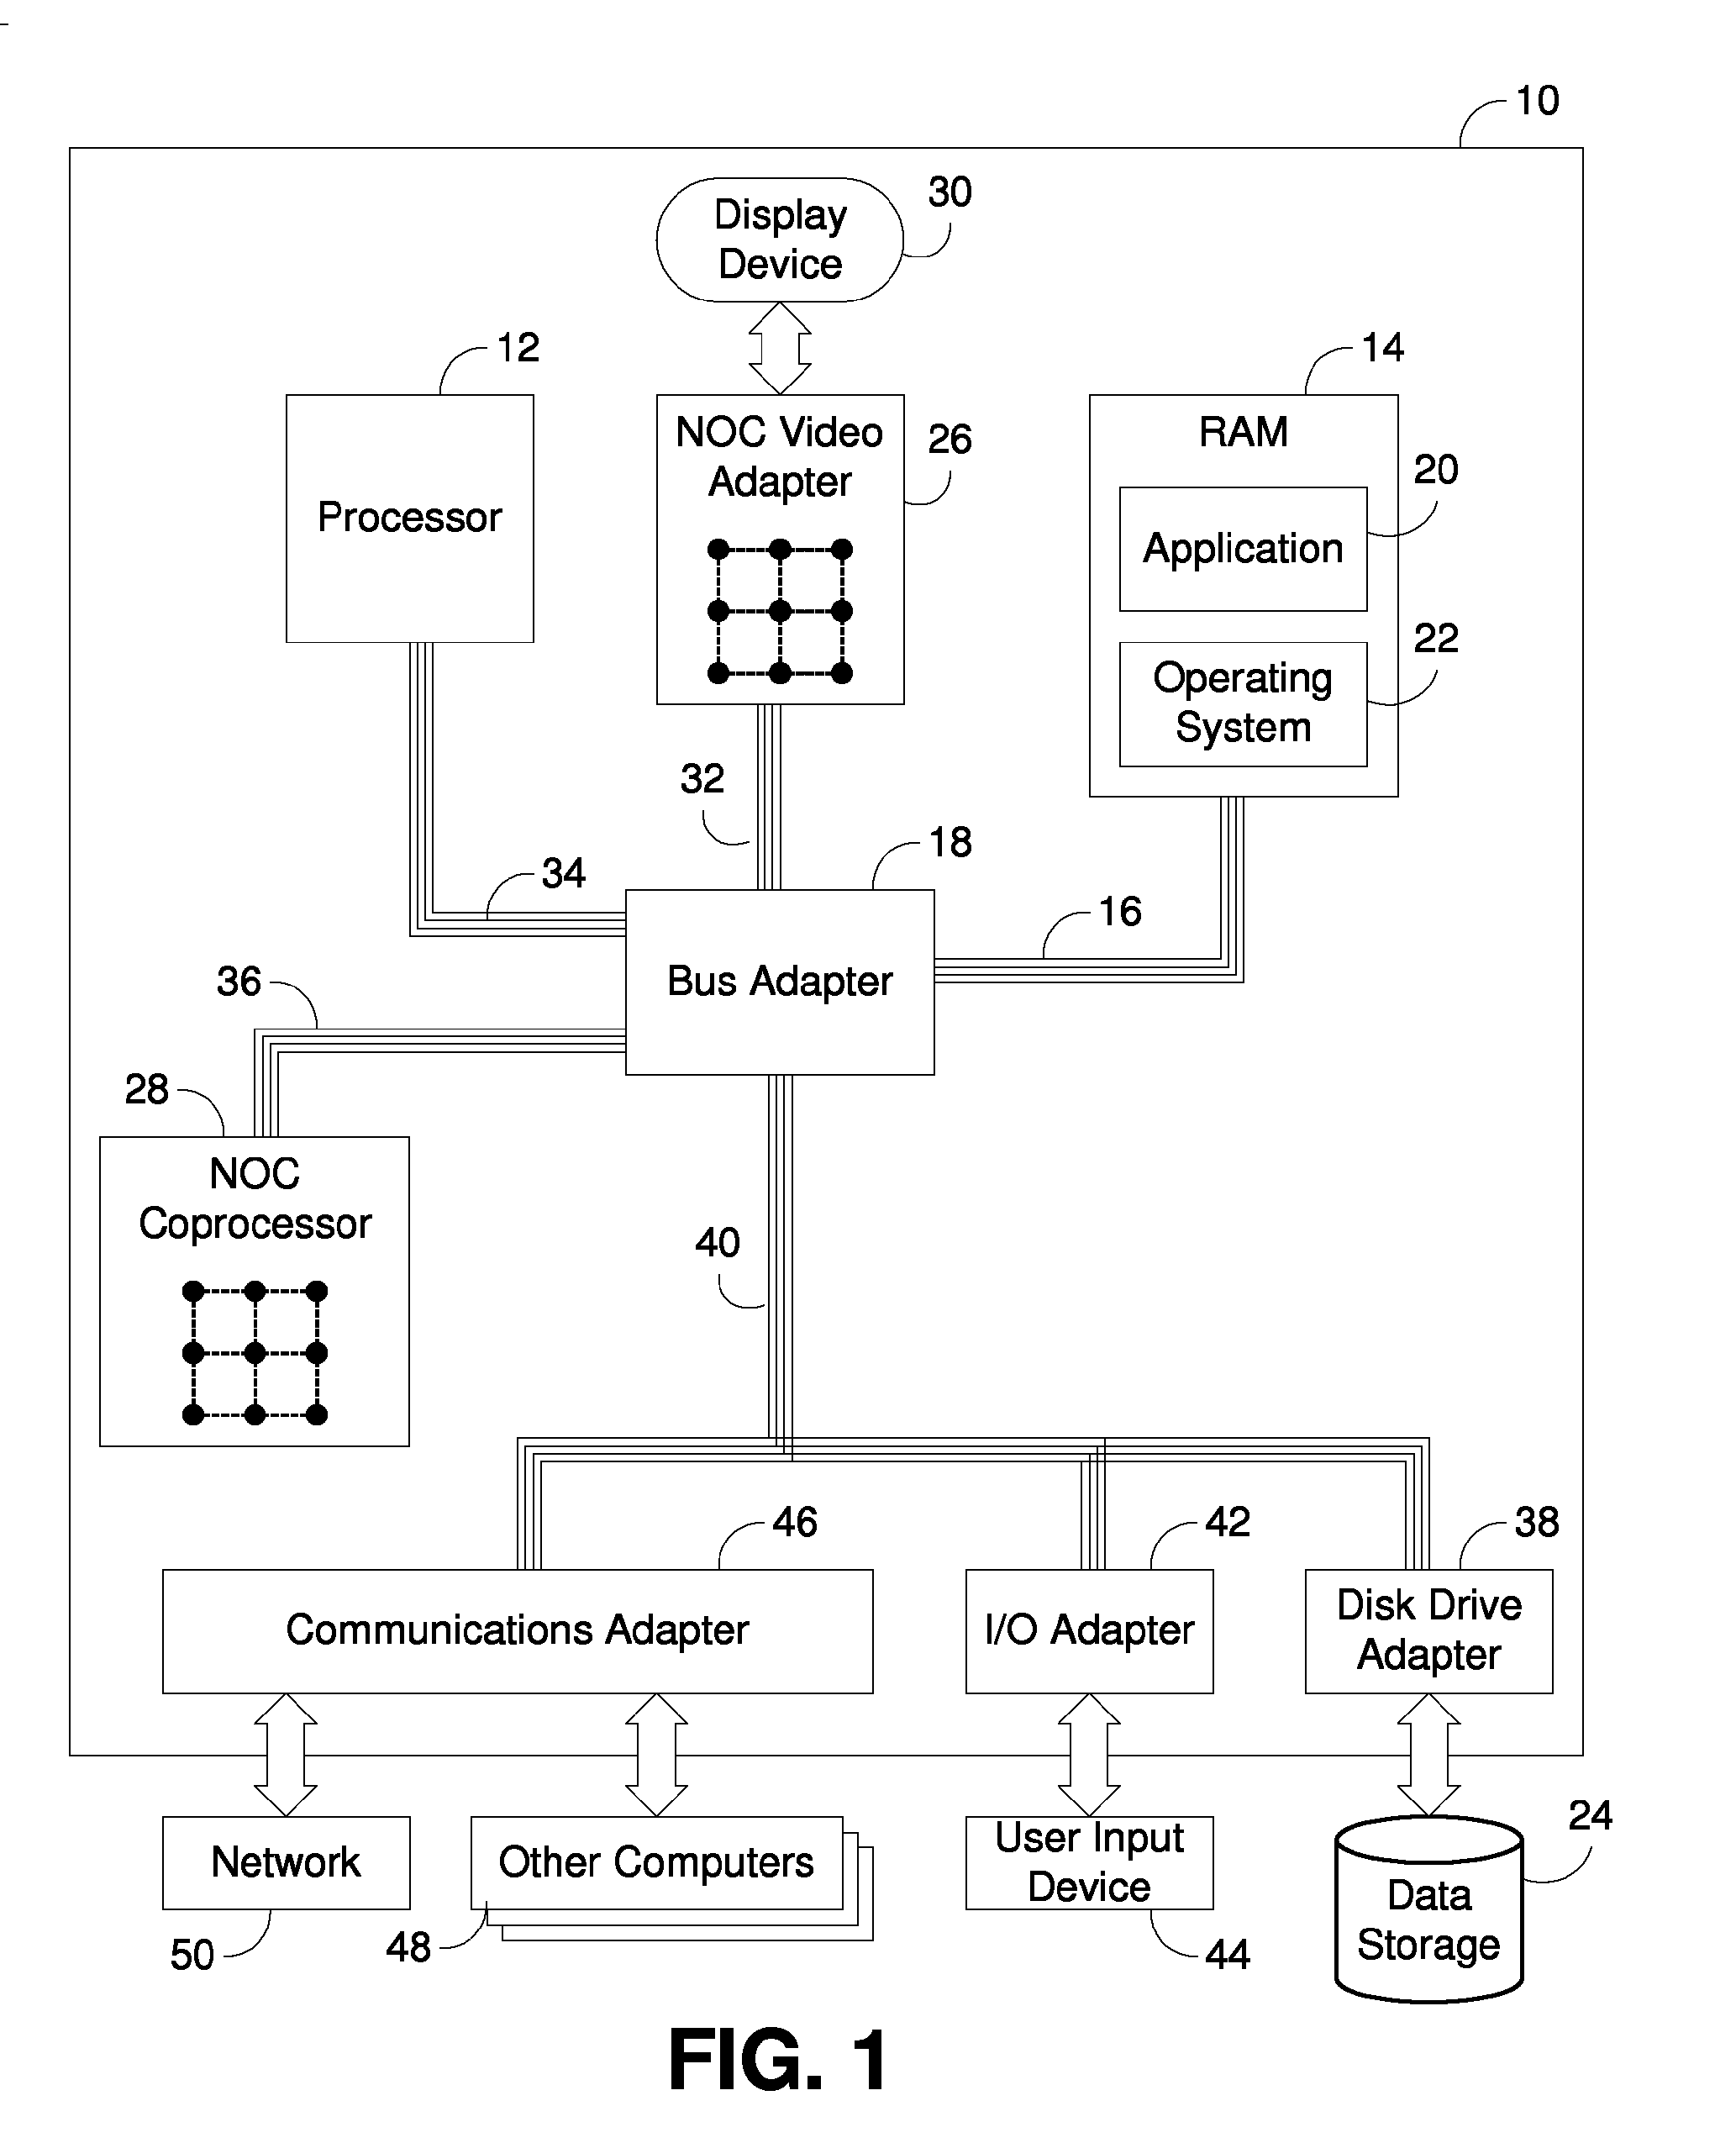 Early exit processing of iterative refinement algorithm using register dependency disable and programmable early exit condition